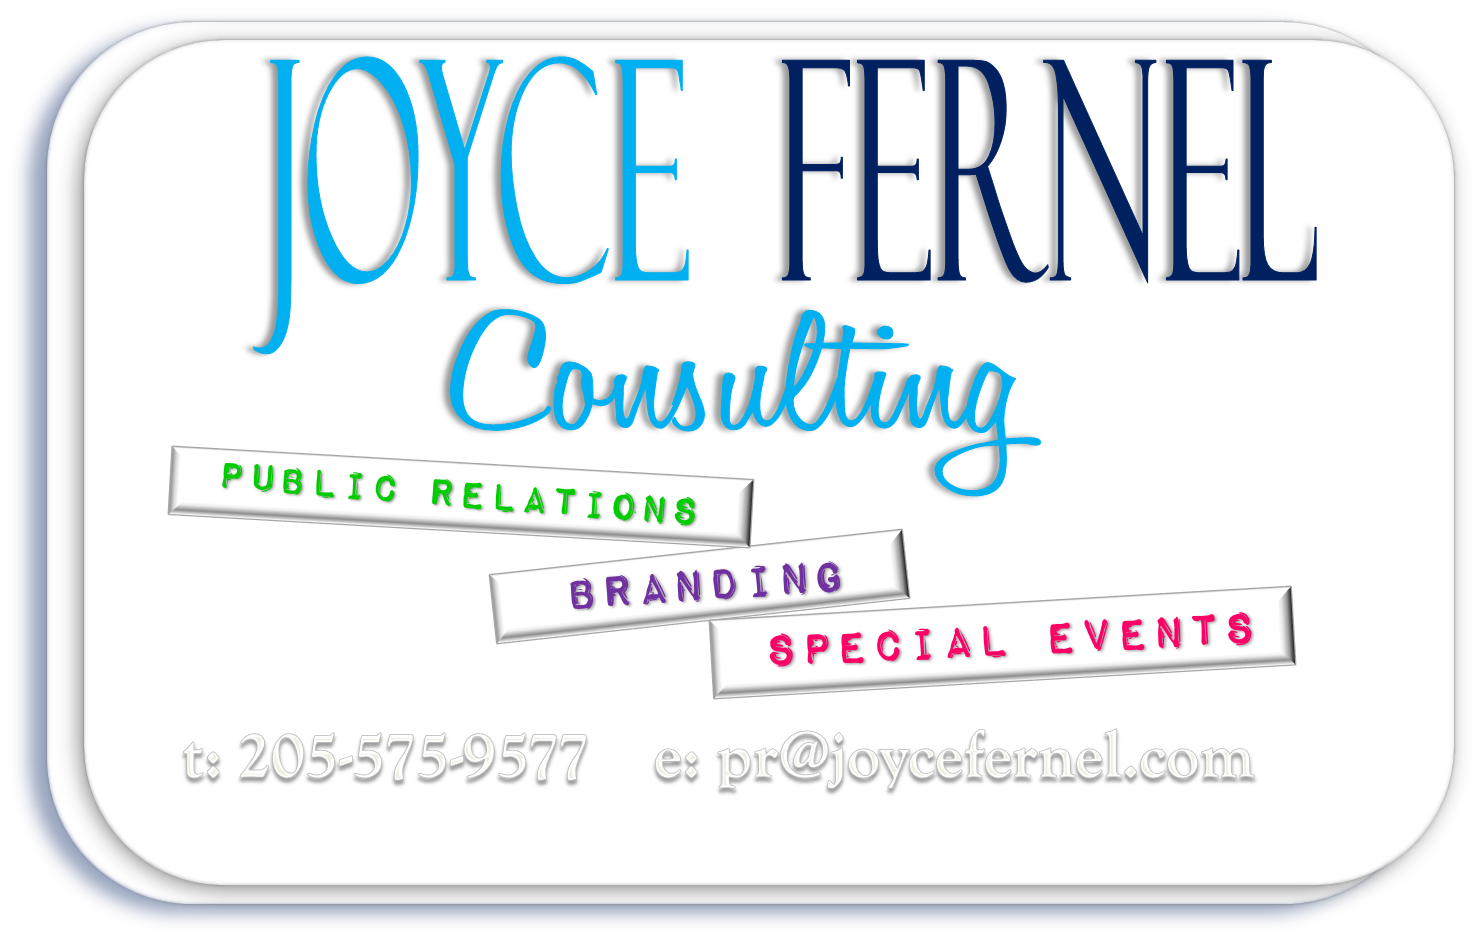 Joyce Fernel Consulting